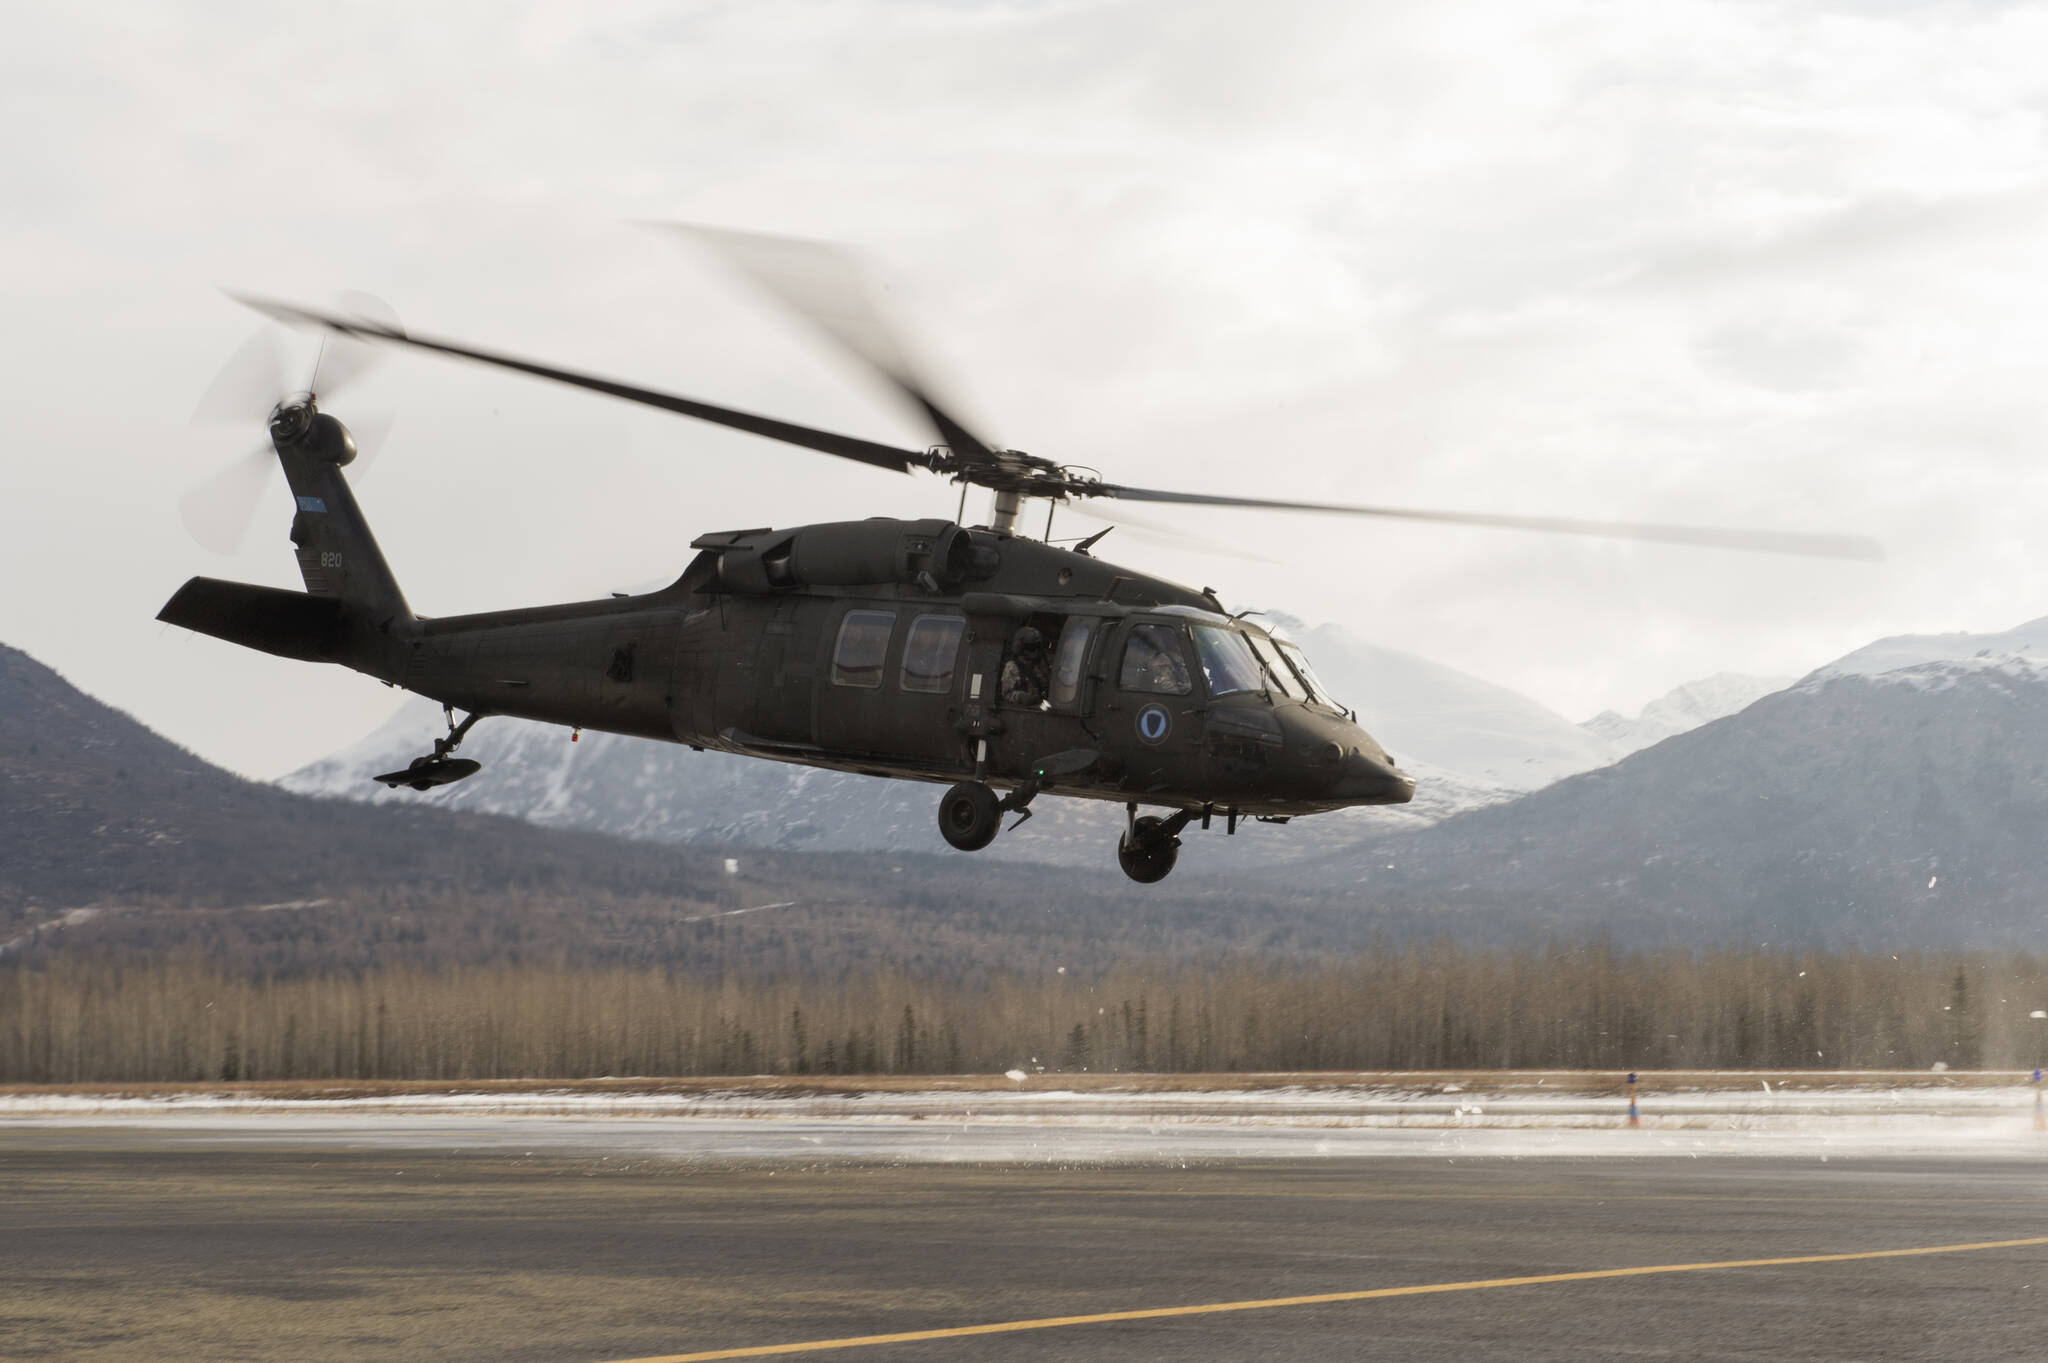 An Alaska Army National Guard aircrew flying a UH-60 Black Hawk aided in the rescue of a mountain biker with a possible spinal injury from the wilderness near Cooper Landing on May 30, 2022. (Alejandro Pena / U.S. Air Force)